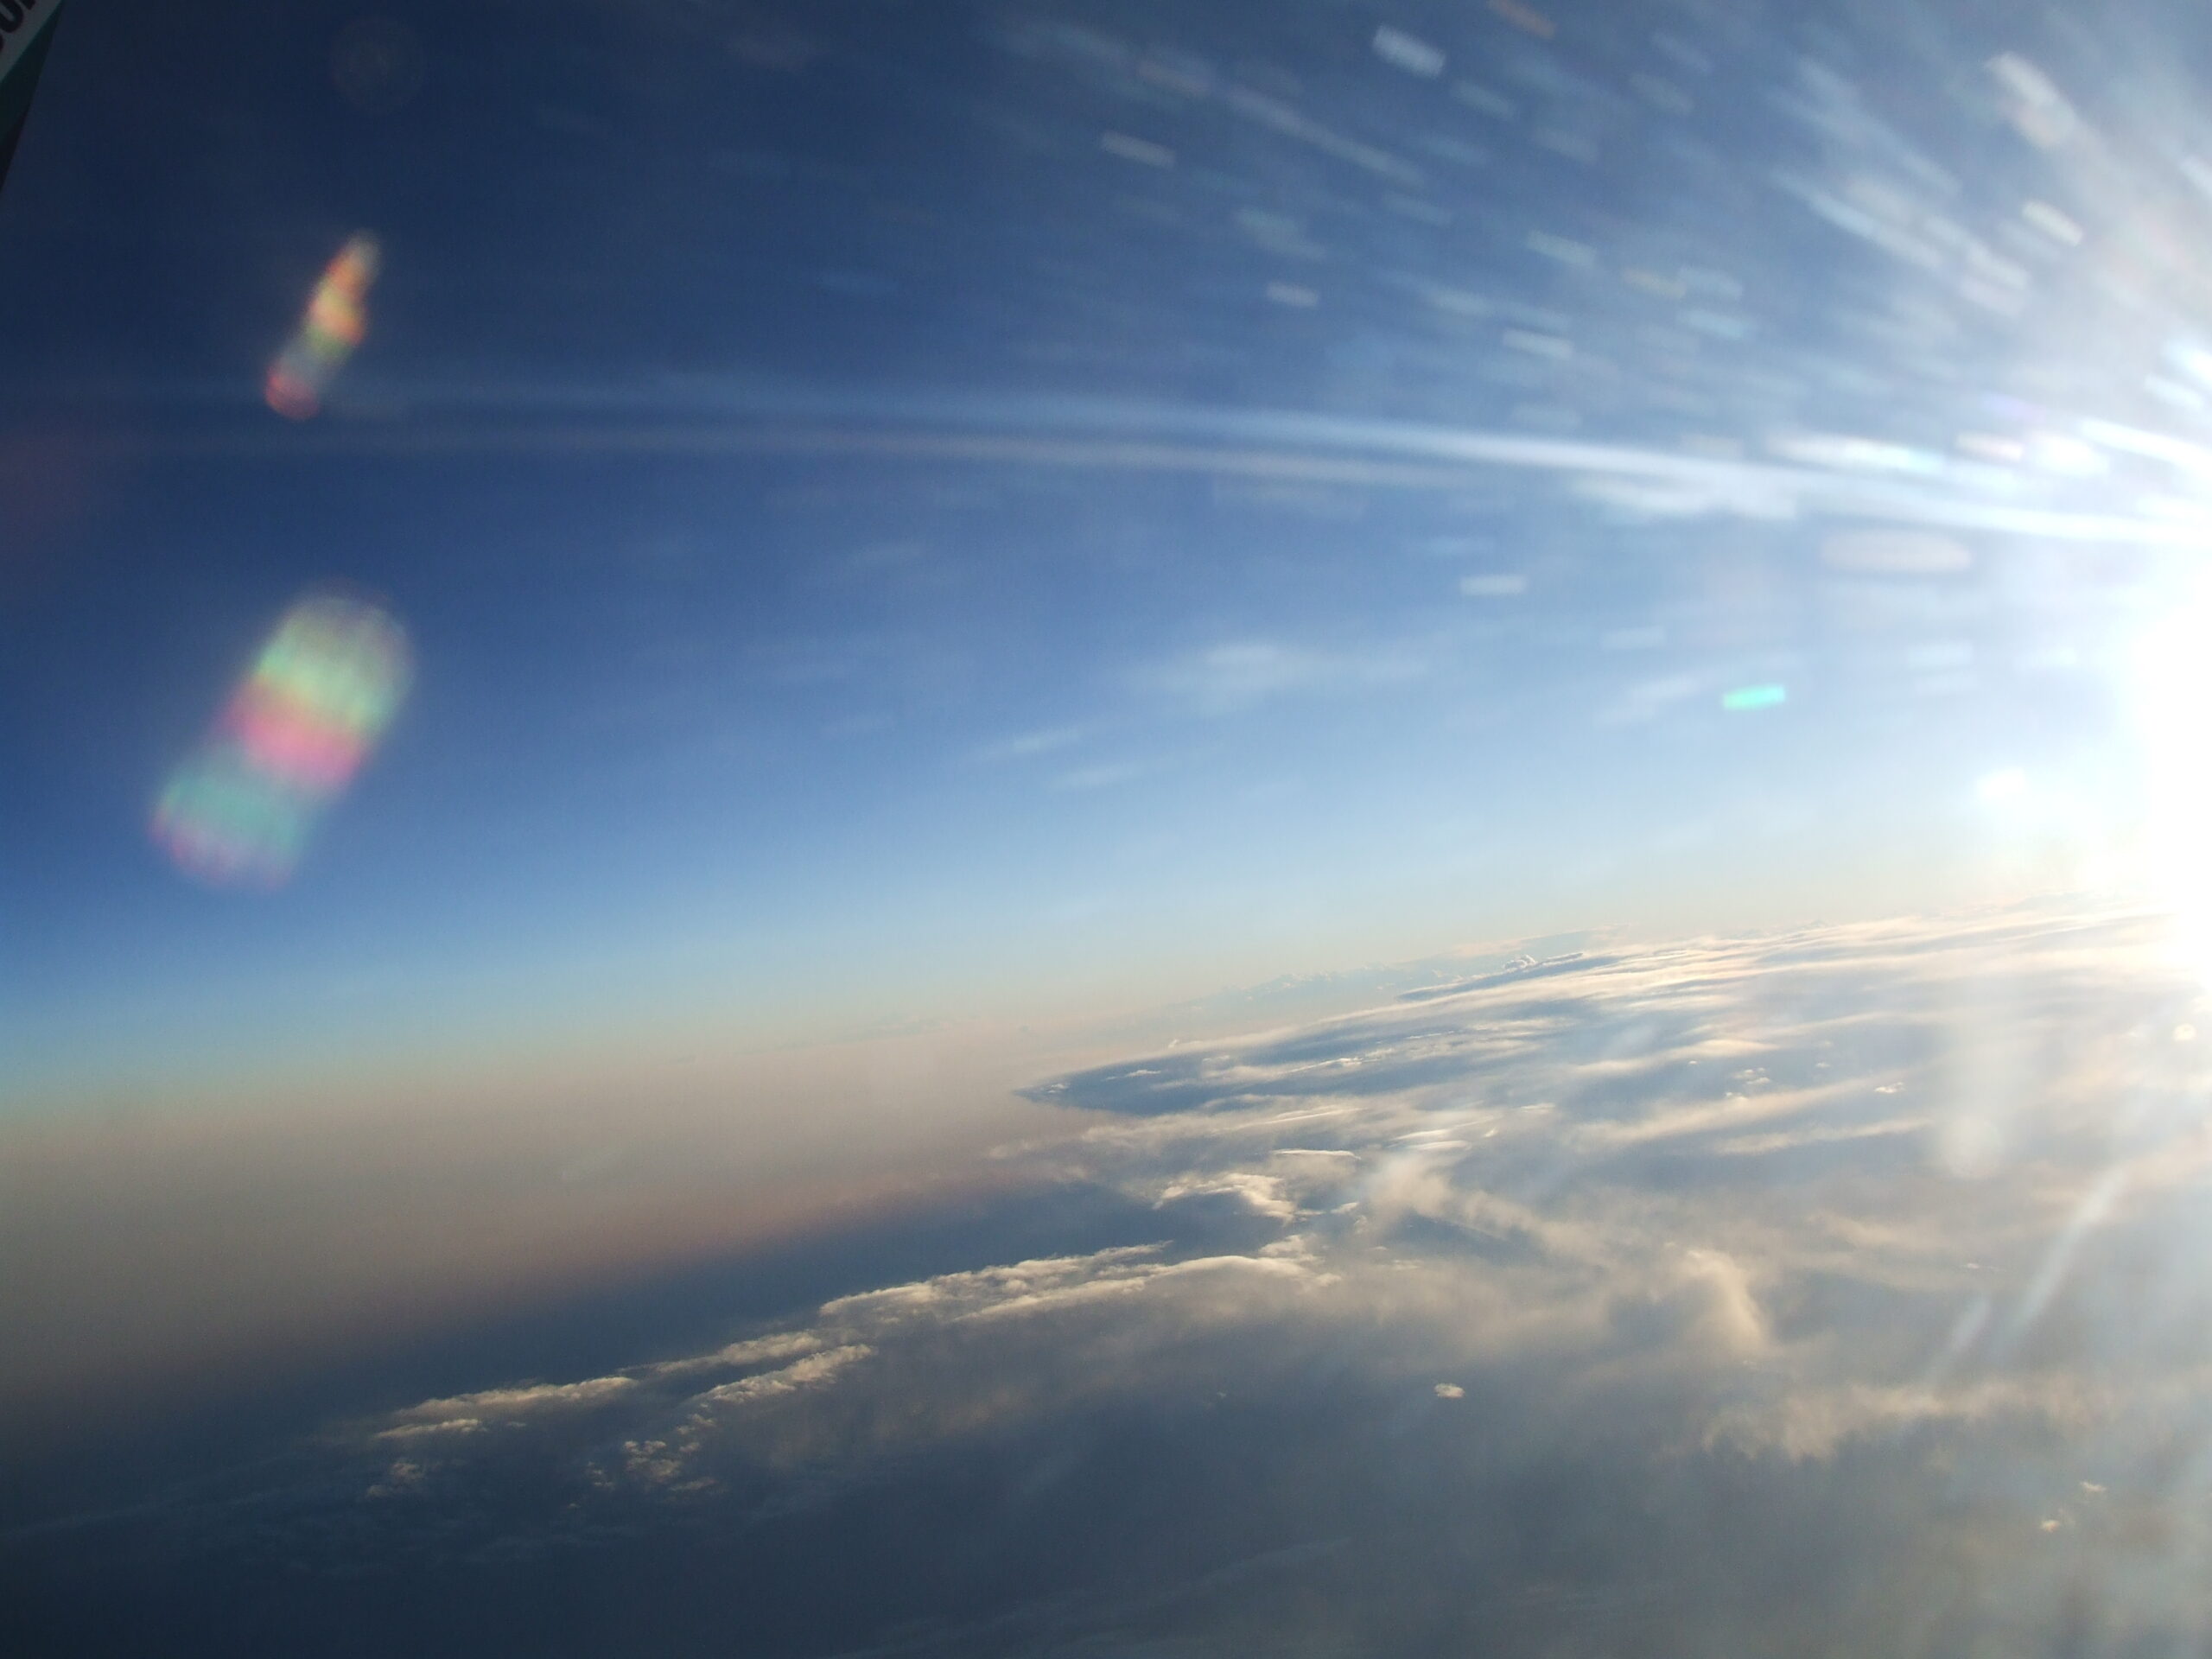 Aerial photo of frost on an airplane window. The sun to the right created 2 rainbow clusters to the left, over a beautiful landscape of rivers and land.